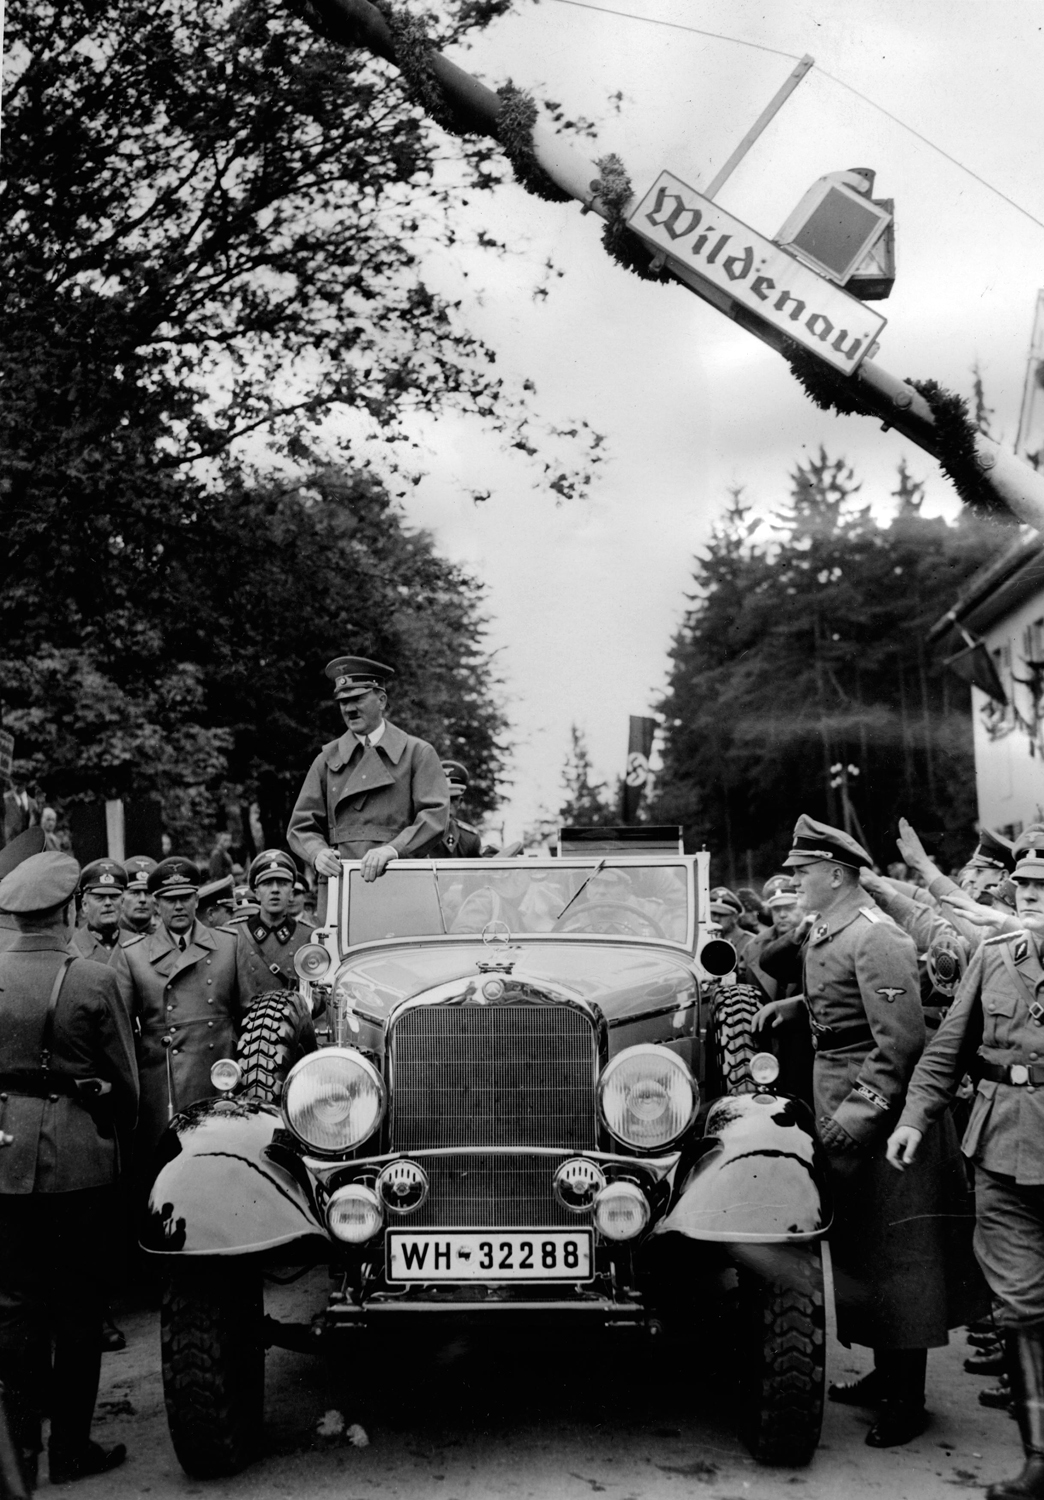 Adolf Hitler crosses the Wildenau border from Germany into Sudetenland with his troops